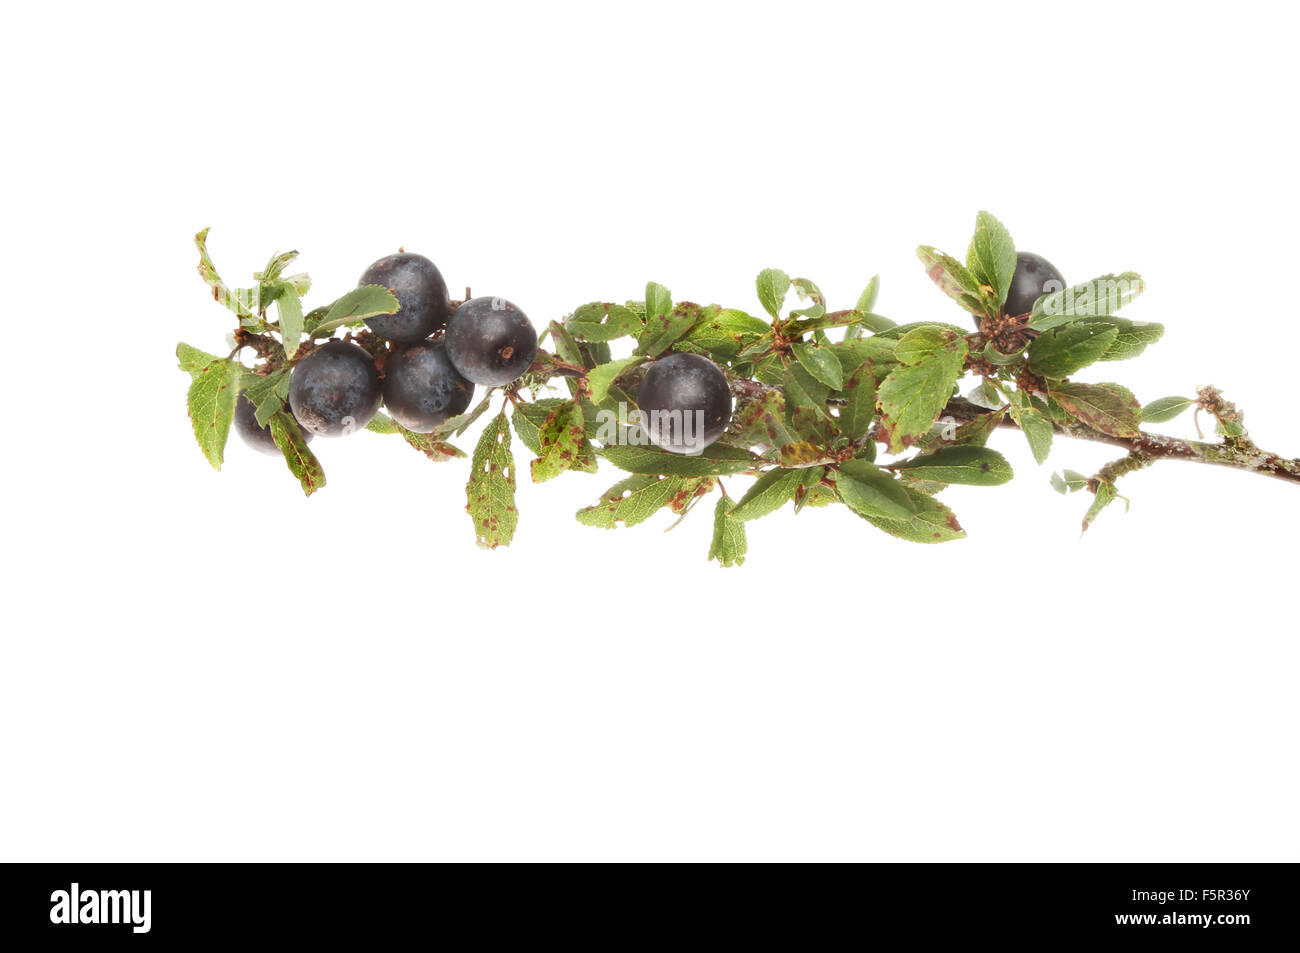 Sloe berries, Prunus spinosa or Blackthorn, on a branch isolated against white Stock Photo